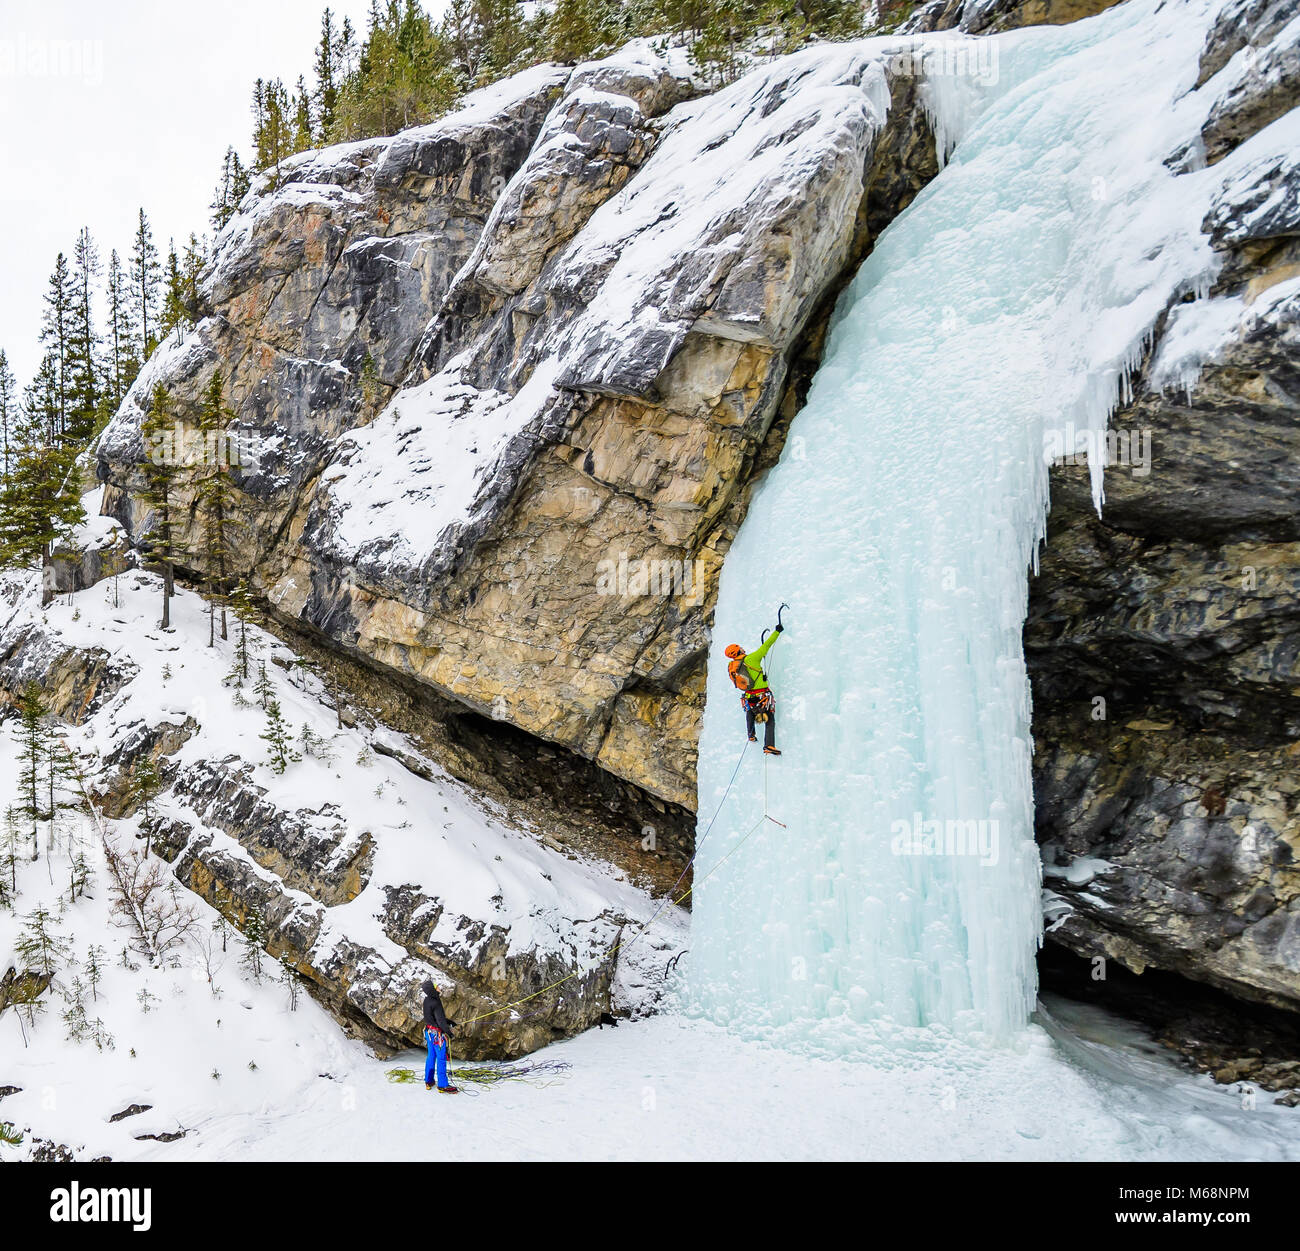 Elijah Weber and Andrew Stone climbing Professor Falls rated WI4 in Banff National Park Stock Photo